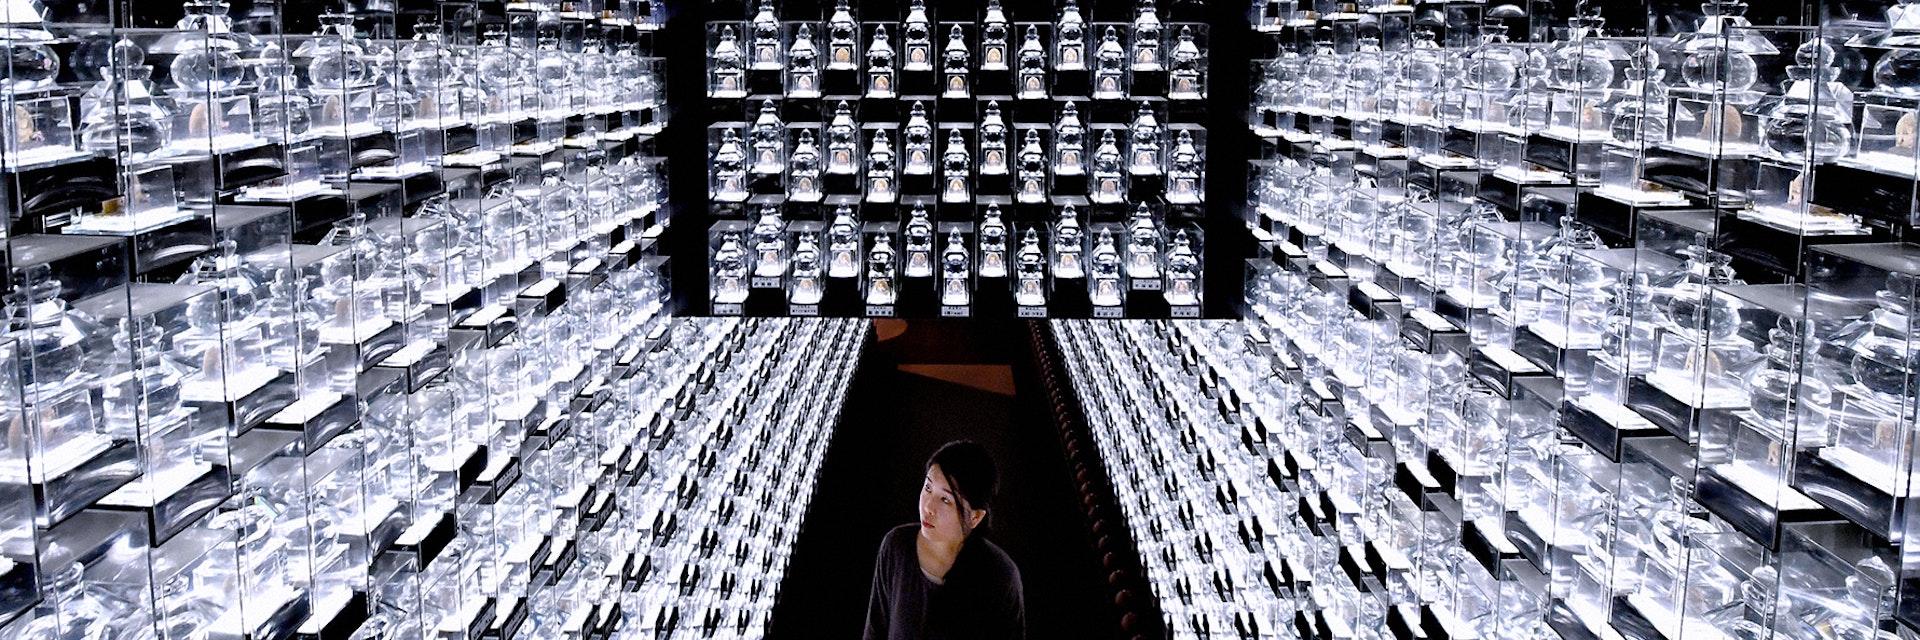 TOKYO, JAPAN - MARCH 07:     Some 10,000 crystal 'Gorinto', five-rings tower is arranged at the 'Corridor of Pray' at Fukagawa Fudodo Temple on March 7, 2017 in Tokyo, Japan. (Photo by The Asahi Shimbun via Getty Images)
668504212